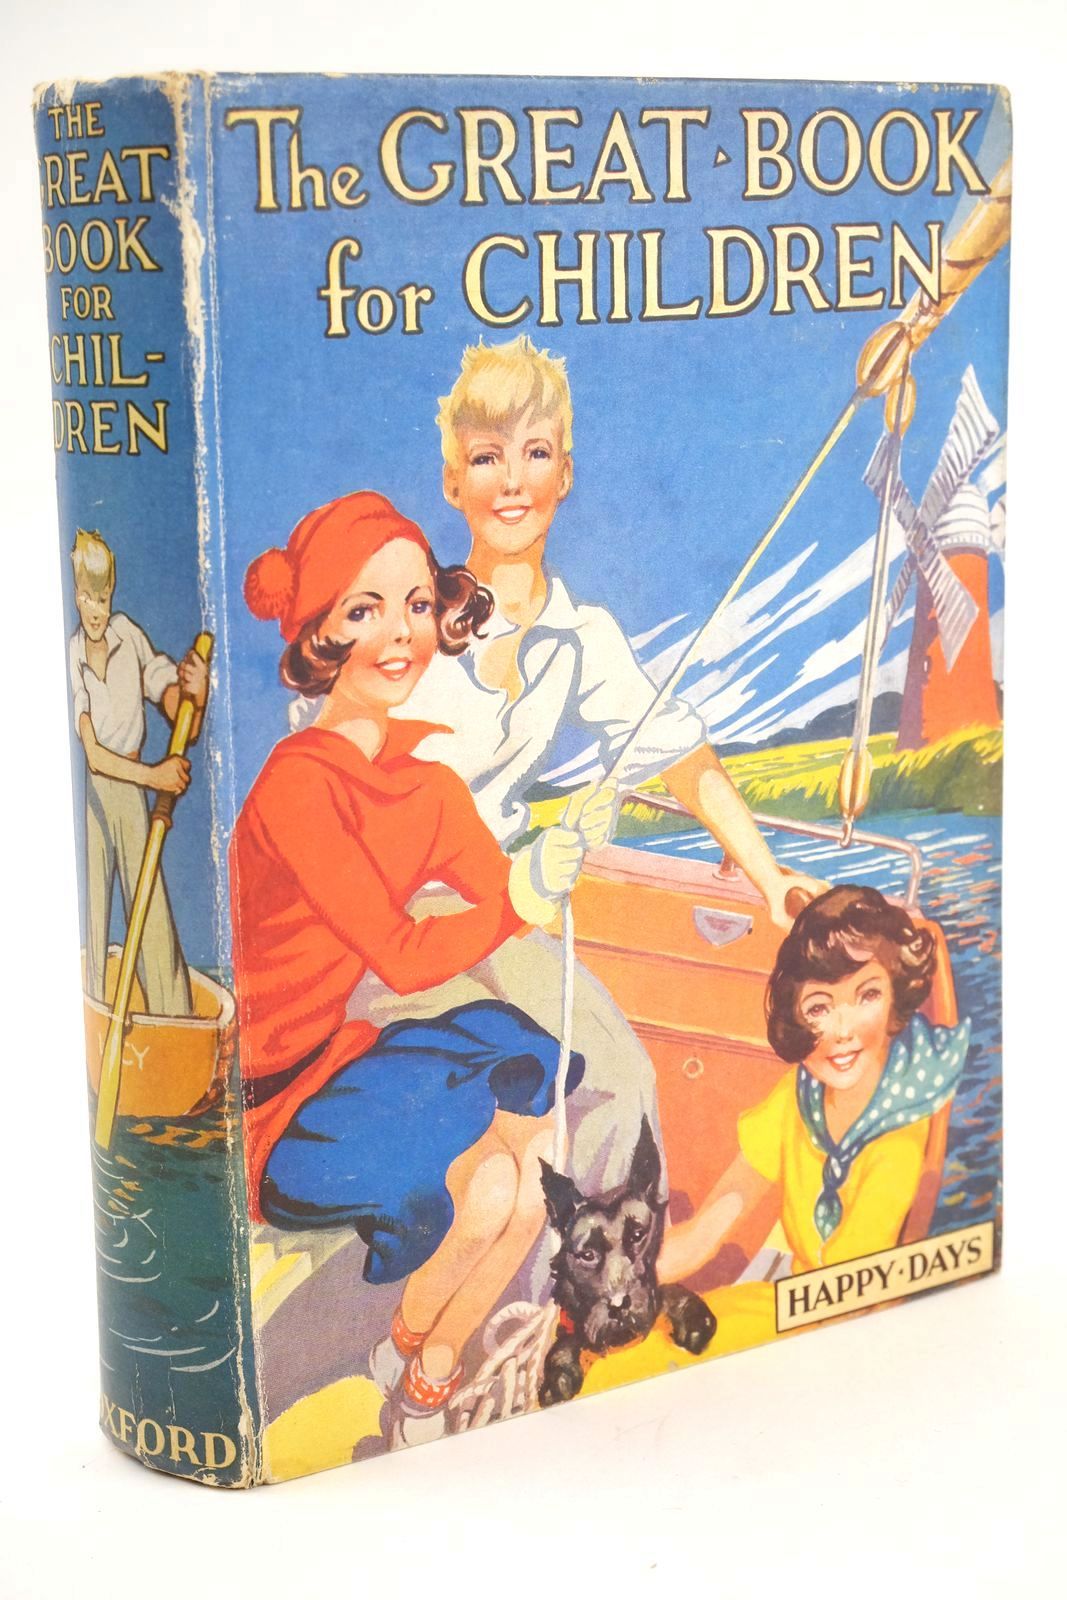 Photo of THE GREAT BOOK FOR CHILDREN written by Strang, Mrs. Herbert Oliver, Jocelyn Peart, M.A. Joan, Natalie et al, illustrated by Brier, E.E. Johnston, M.D. Watson, A.H. Peart, M.A. et al., published by Oxford University Press, Humphrey Milford (STOCK CODE: 1324757)  for sale by Stella & Rose's Books